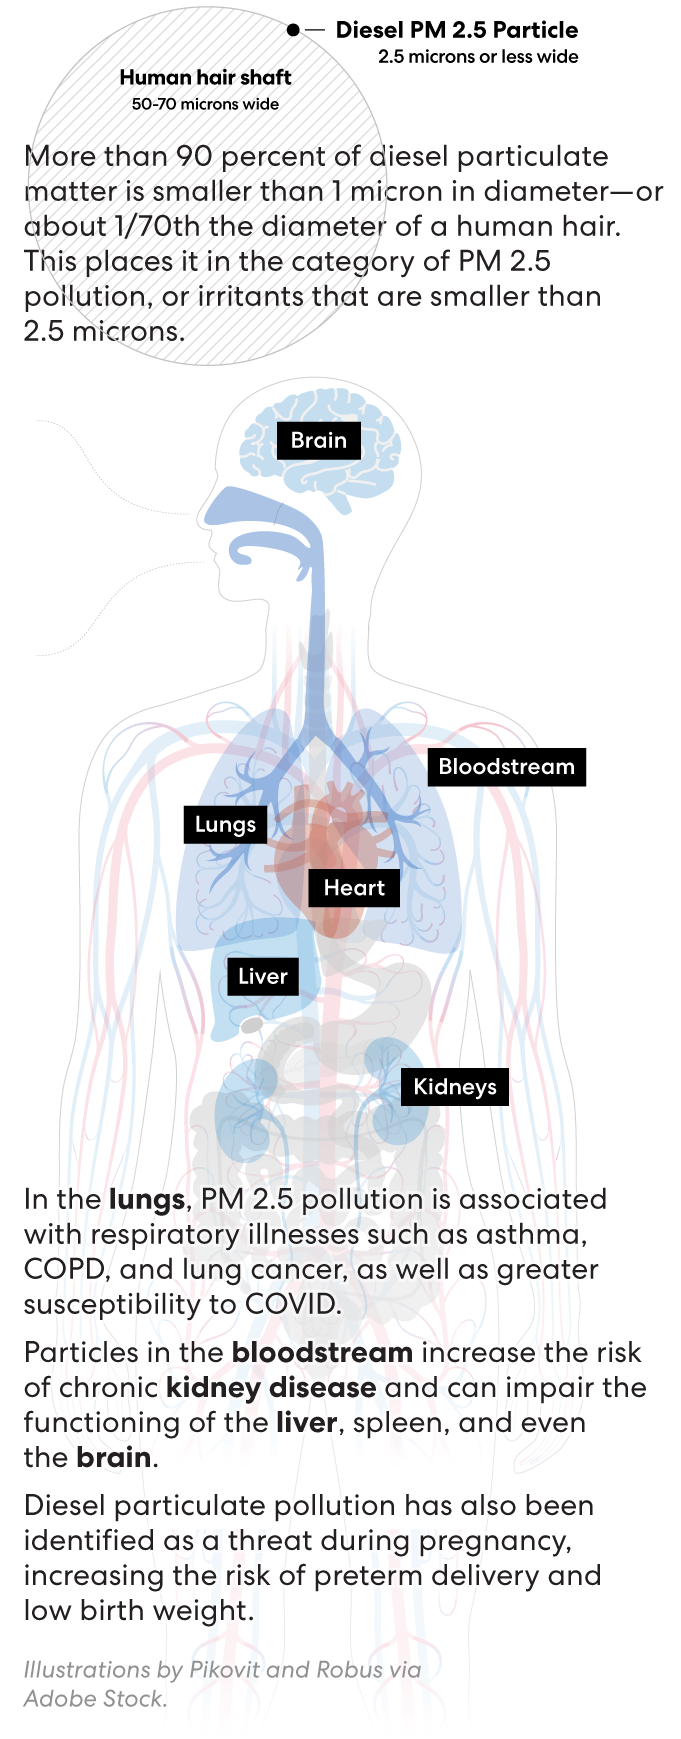 Graphic showing health effects of diesel PM 2.5 pollution.